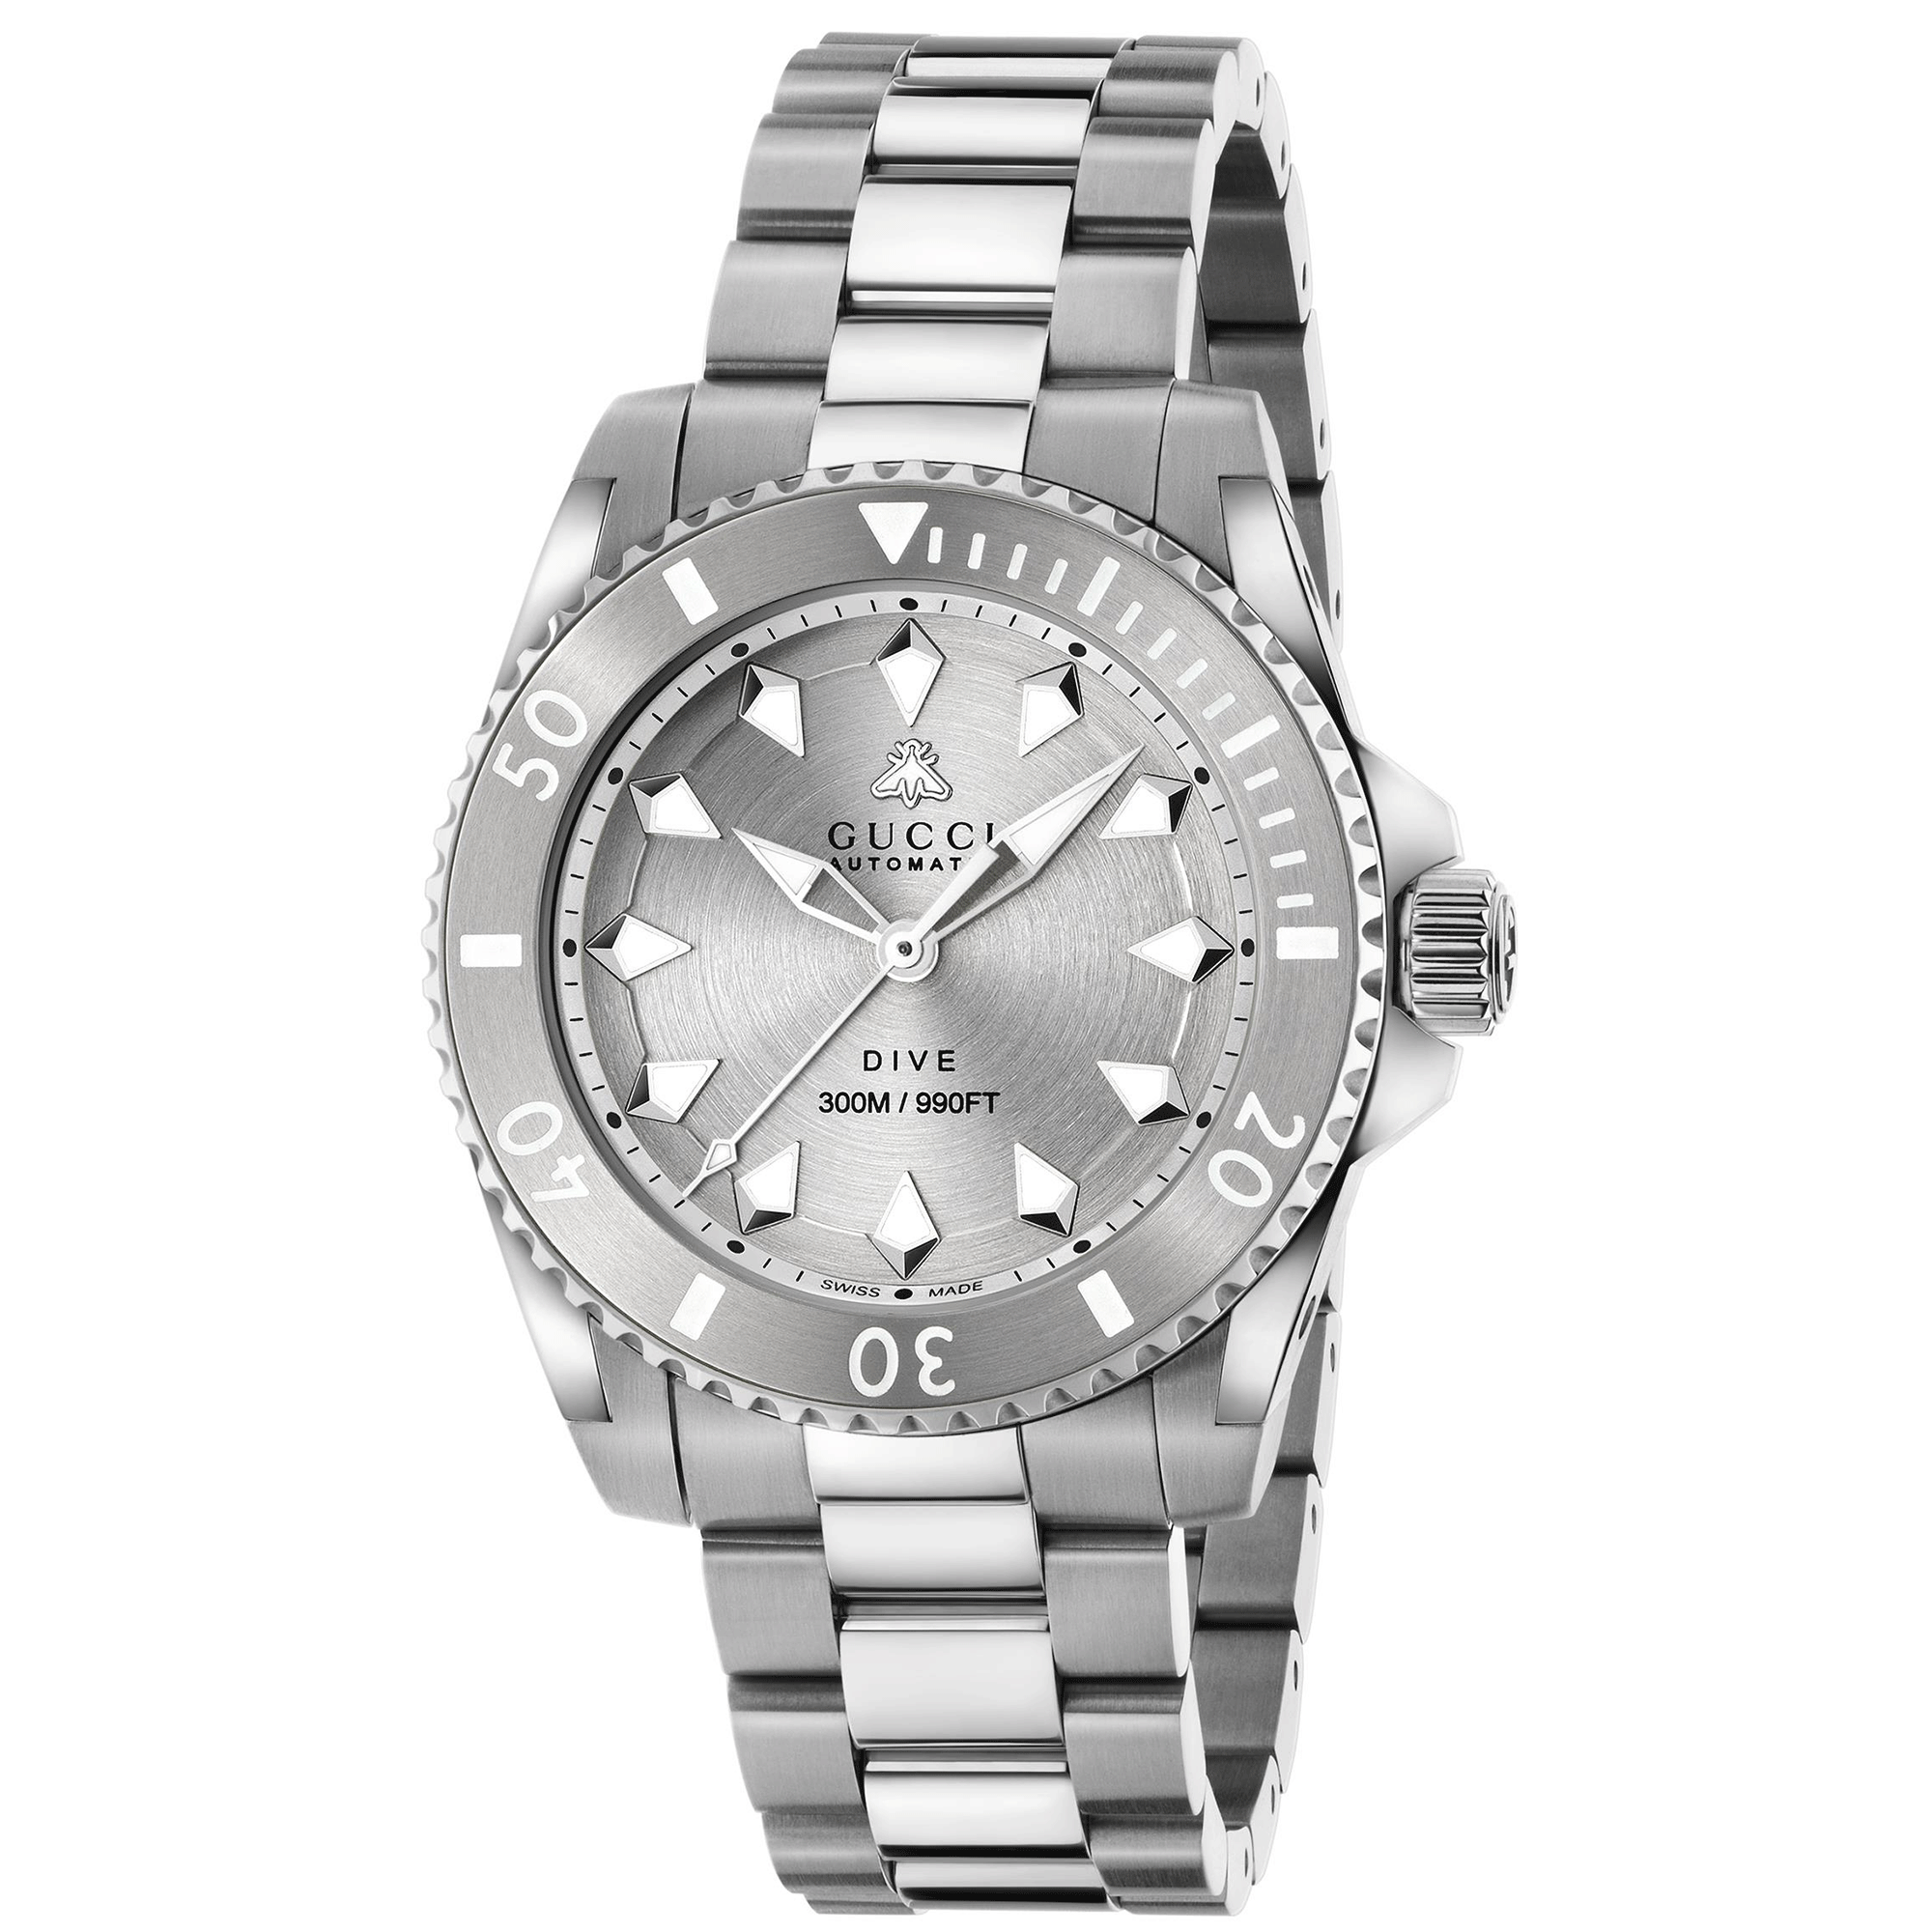 Gucci Dive 40mm Automatic Stainless Steel Watch With A Silver Dial & Ceramic Bezel